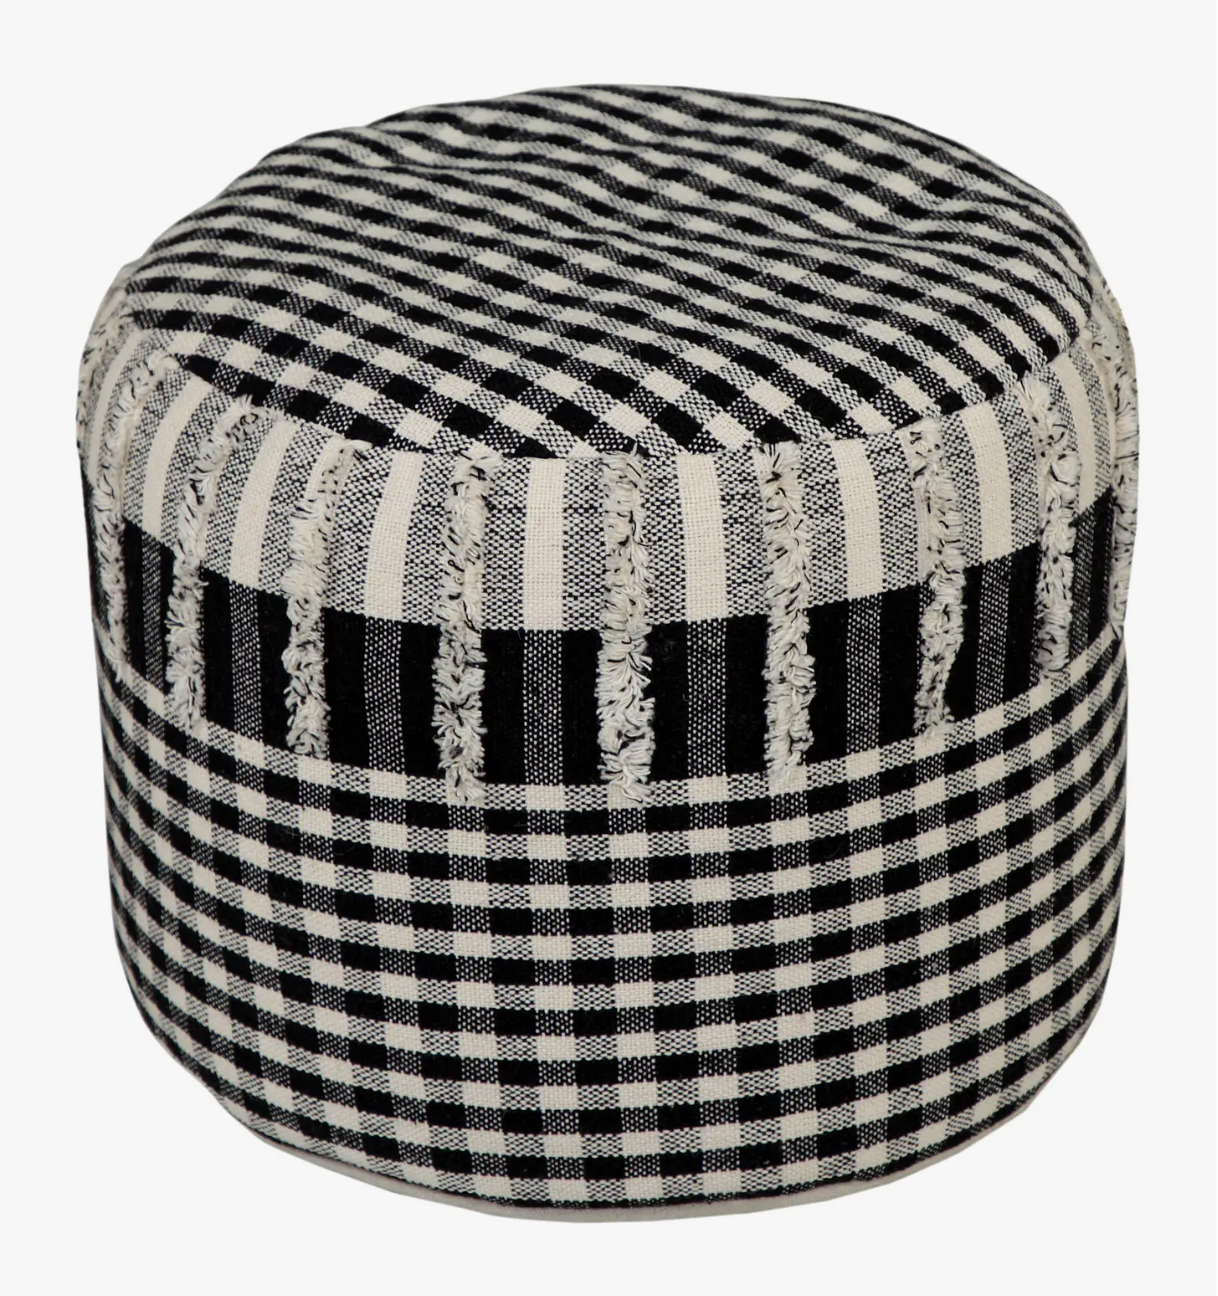 Checkered Gingham Pouf